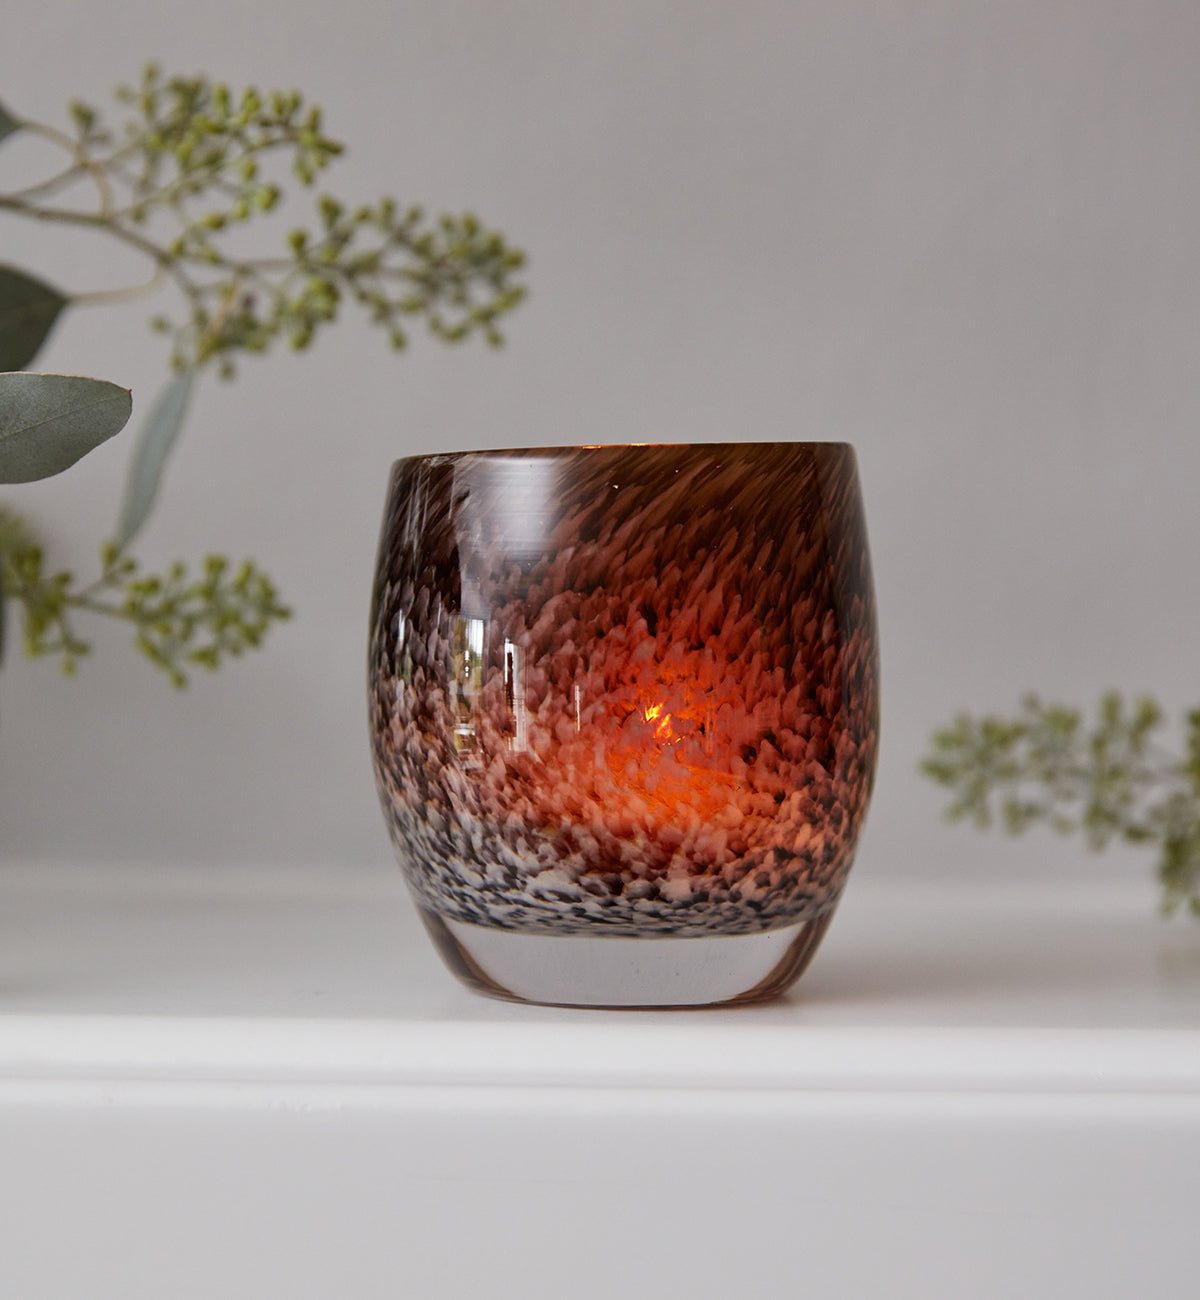 under a wing, an amber and brown mottled hand-blown glass candle holder.